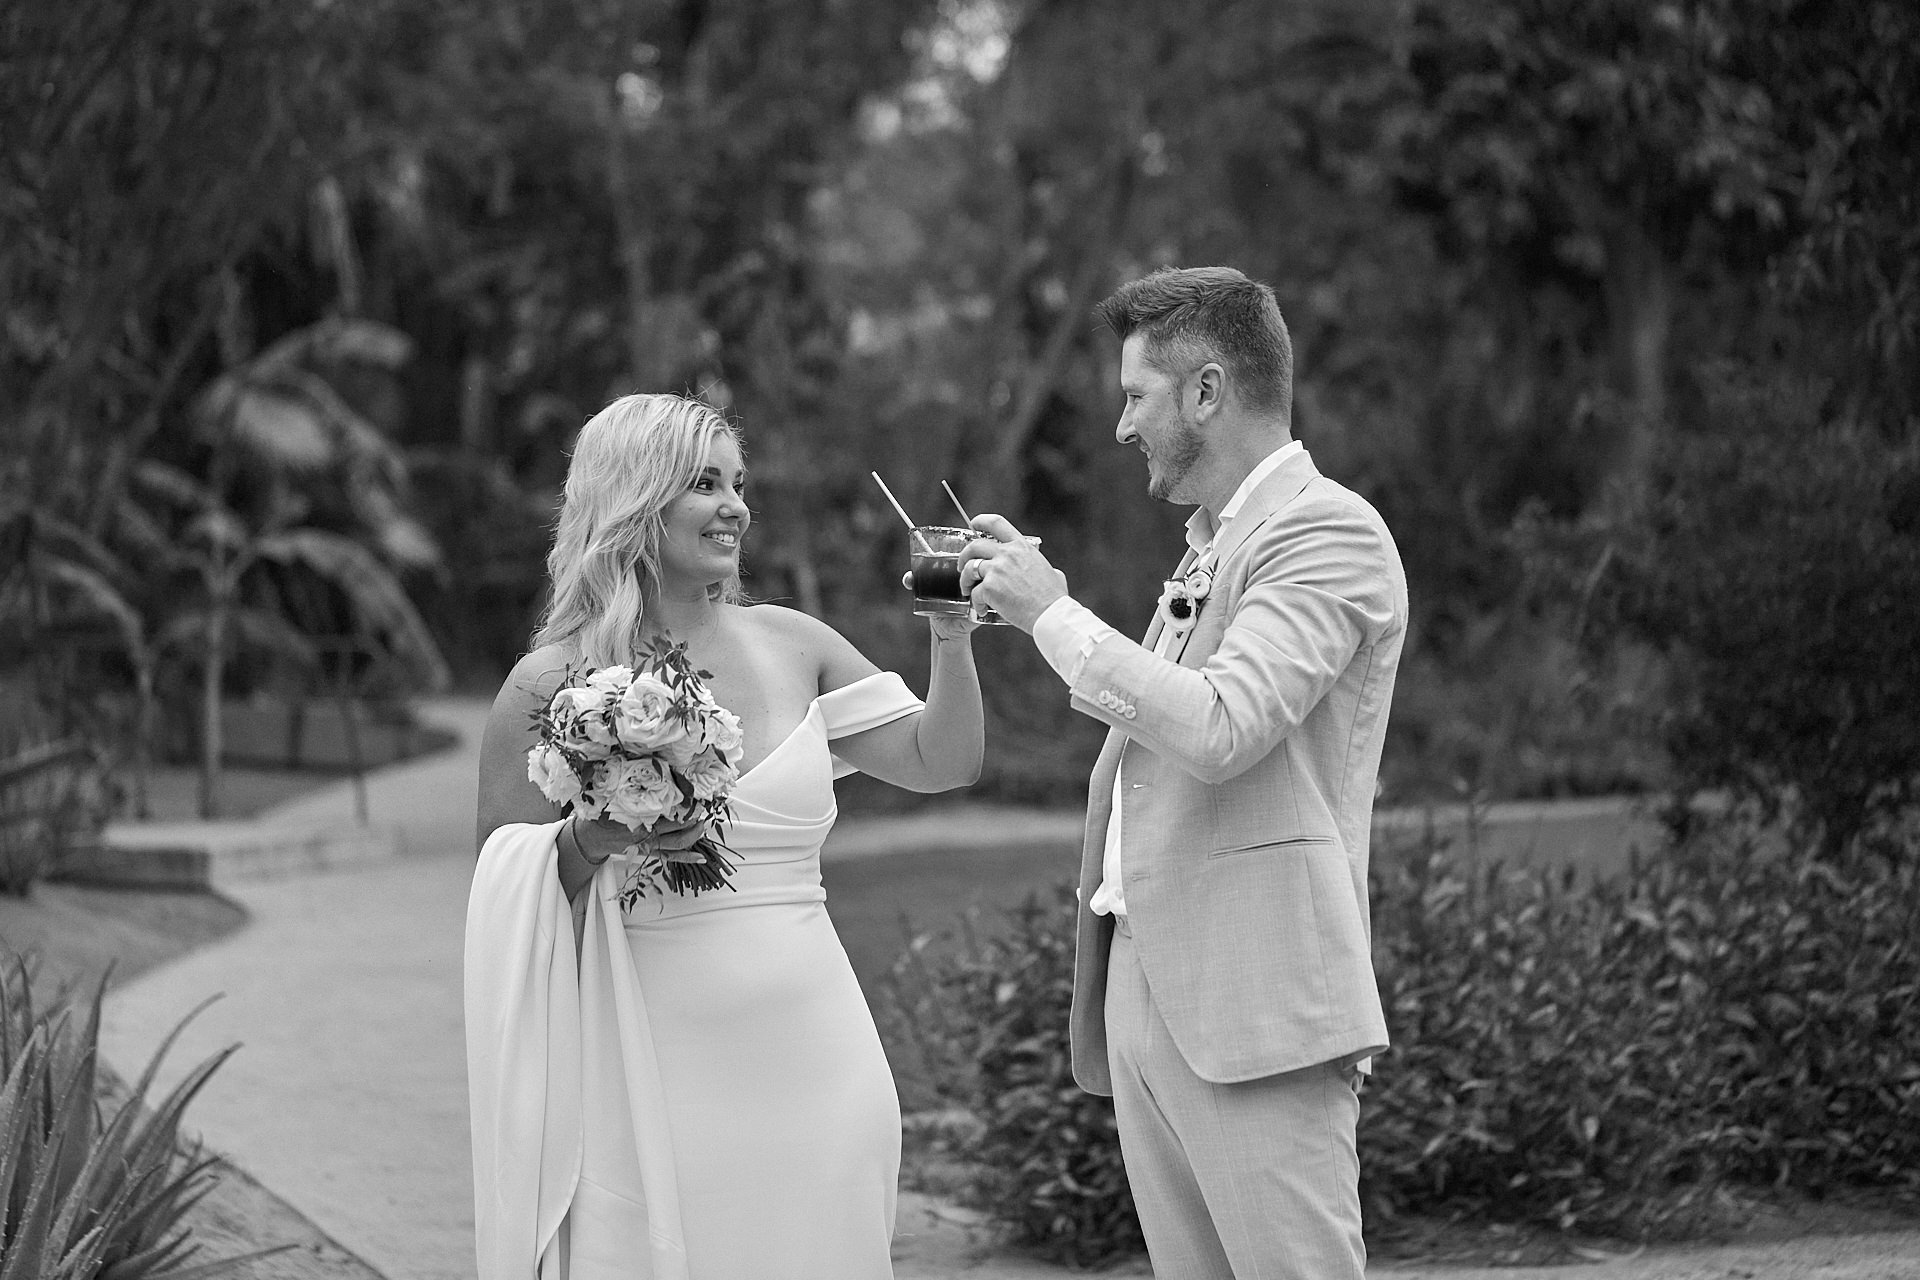 A black and white photo of a bride and groom sharing a glass of wine.